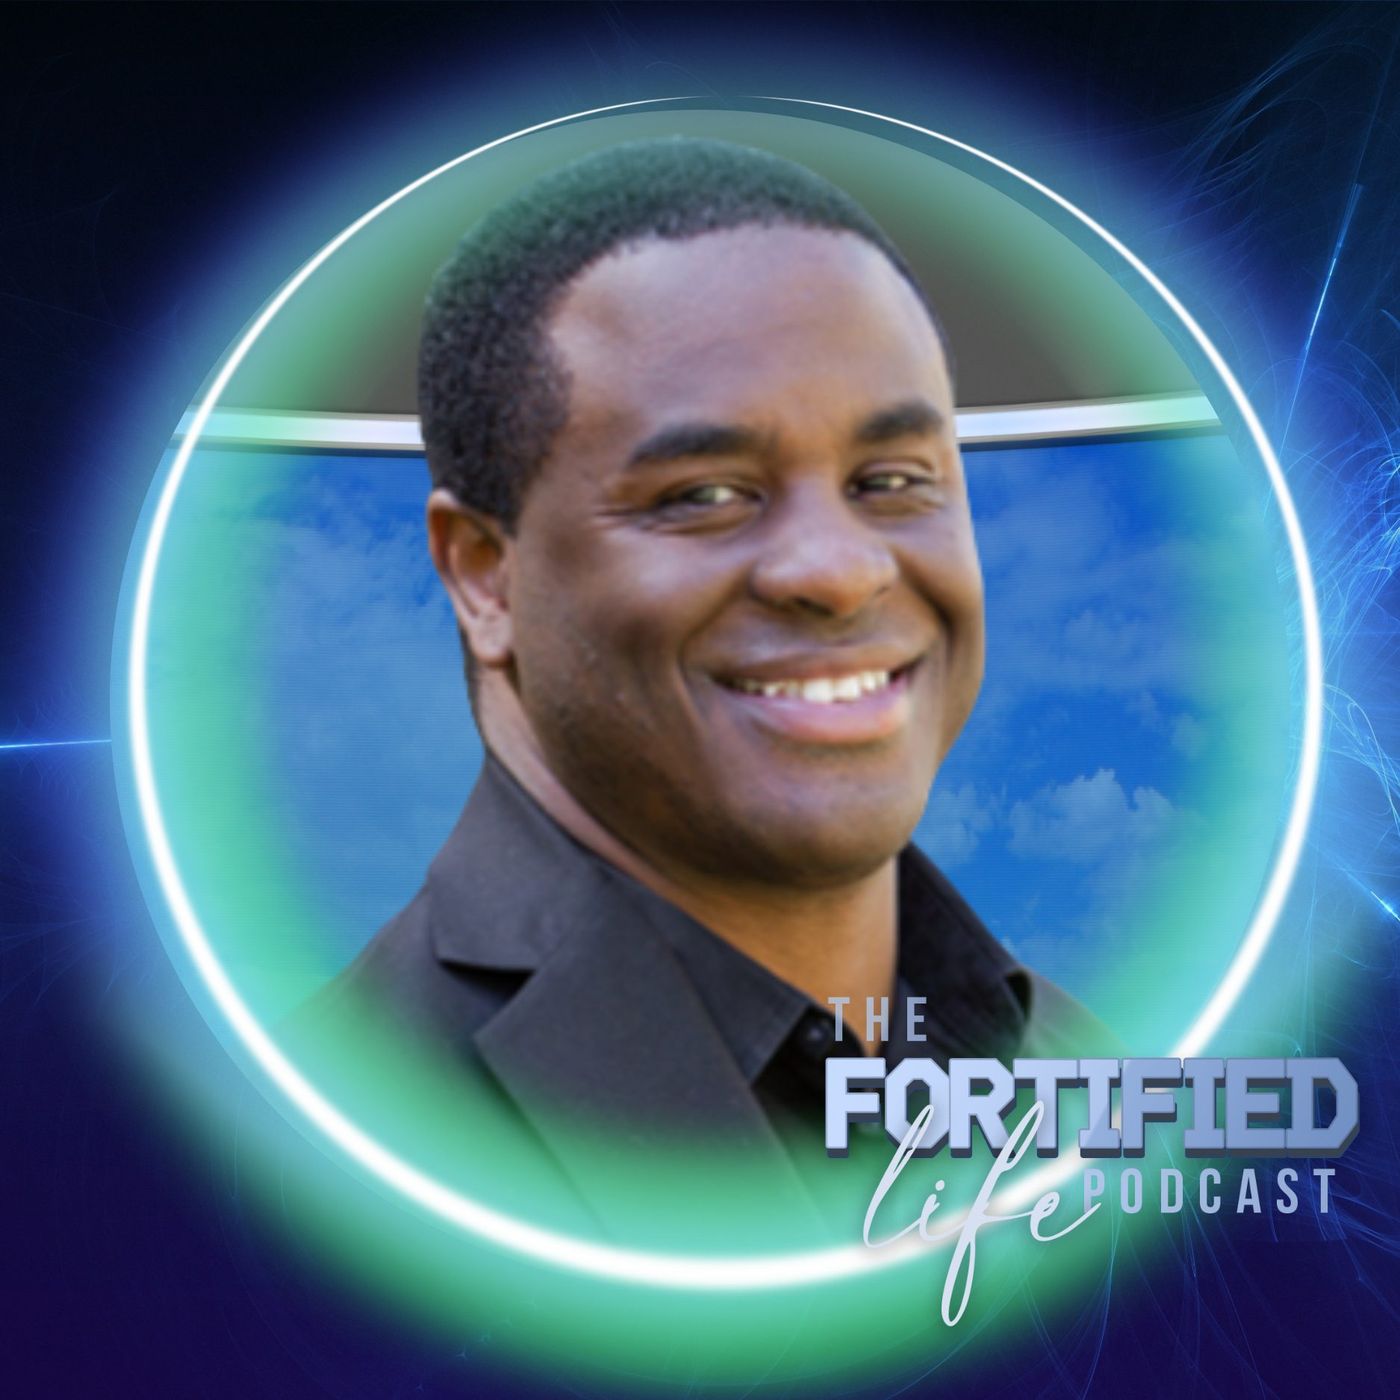 The Fortified Life Podcast with Jason Davis - EP 136 w/ JADE WARSHAW |  debt elimination expert, financial coach, and co-host of The Ramsey